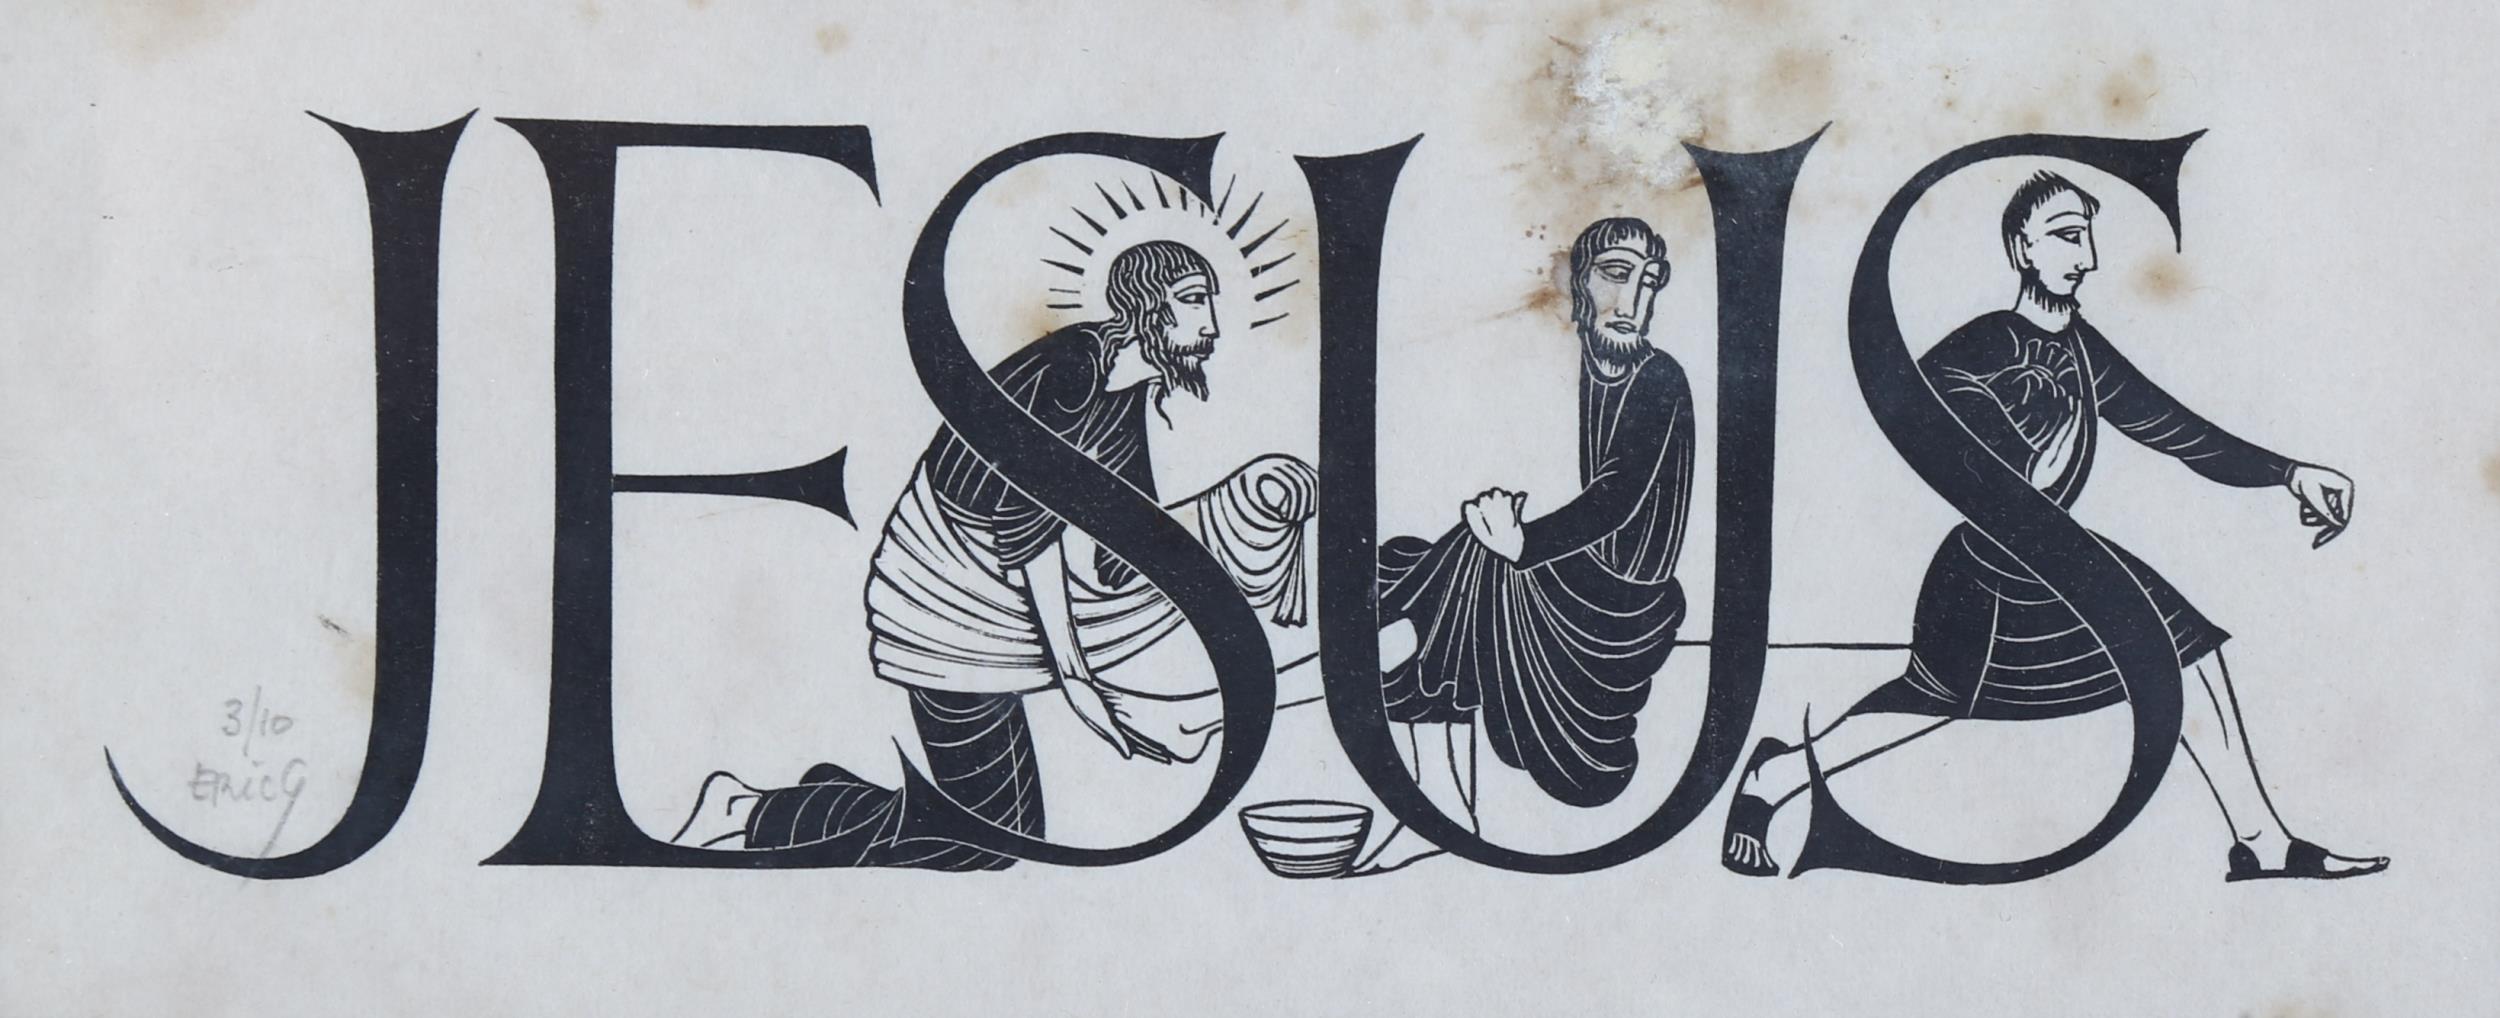 Eric Gill, woodblock print, Jesus, signed in pencil, no. 3/10, 8cm x 20cm Damp stain along top